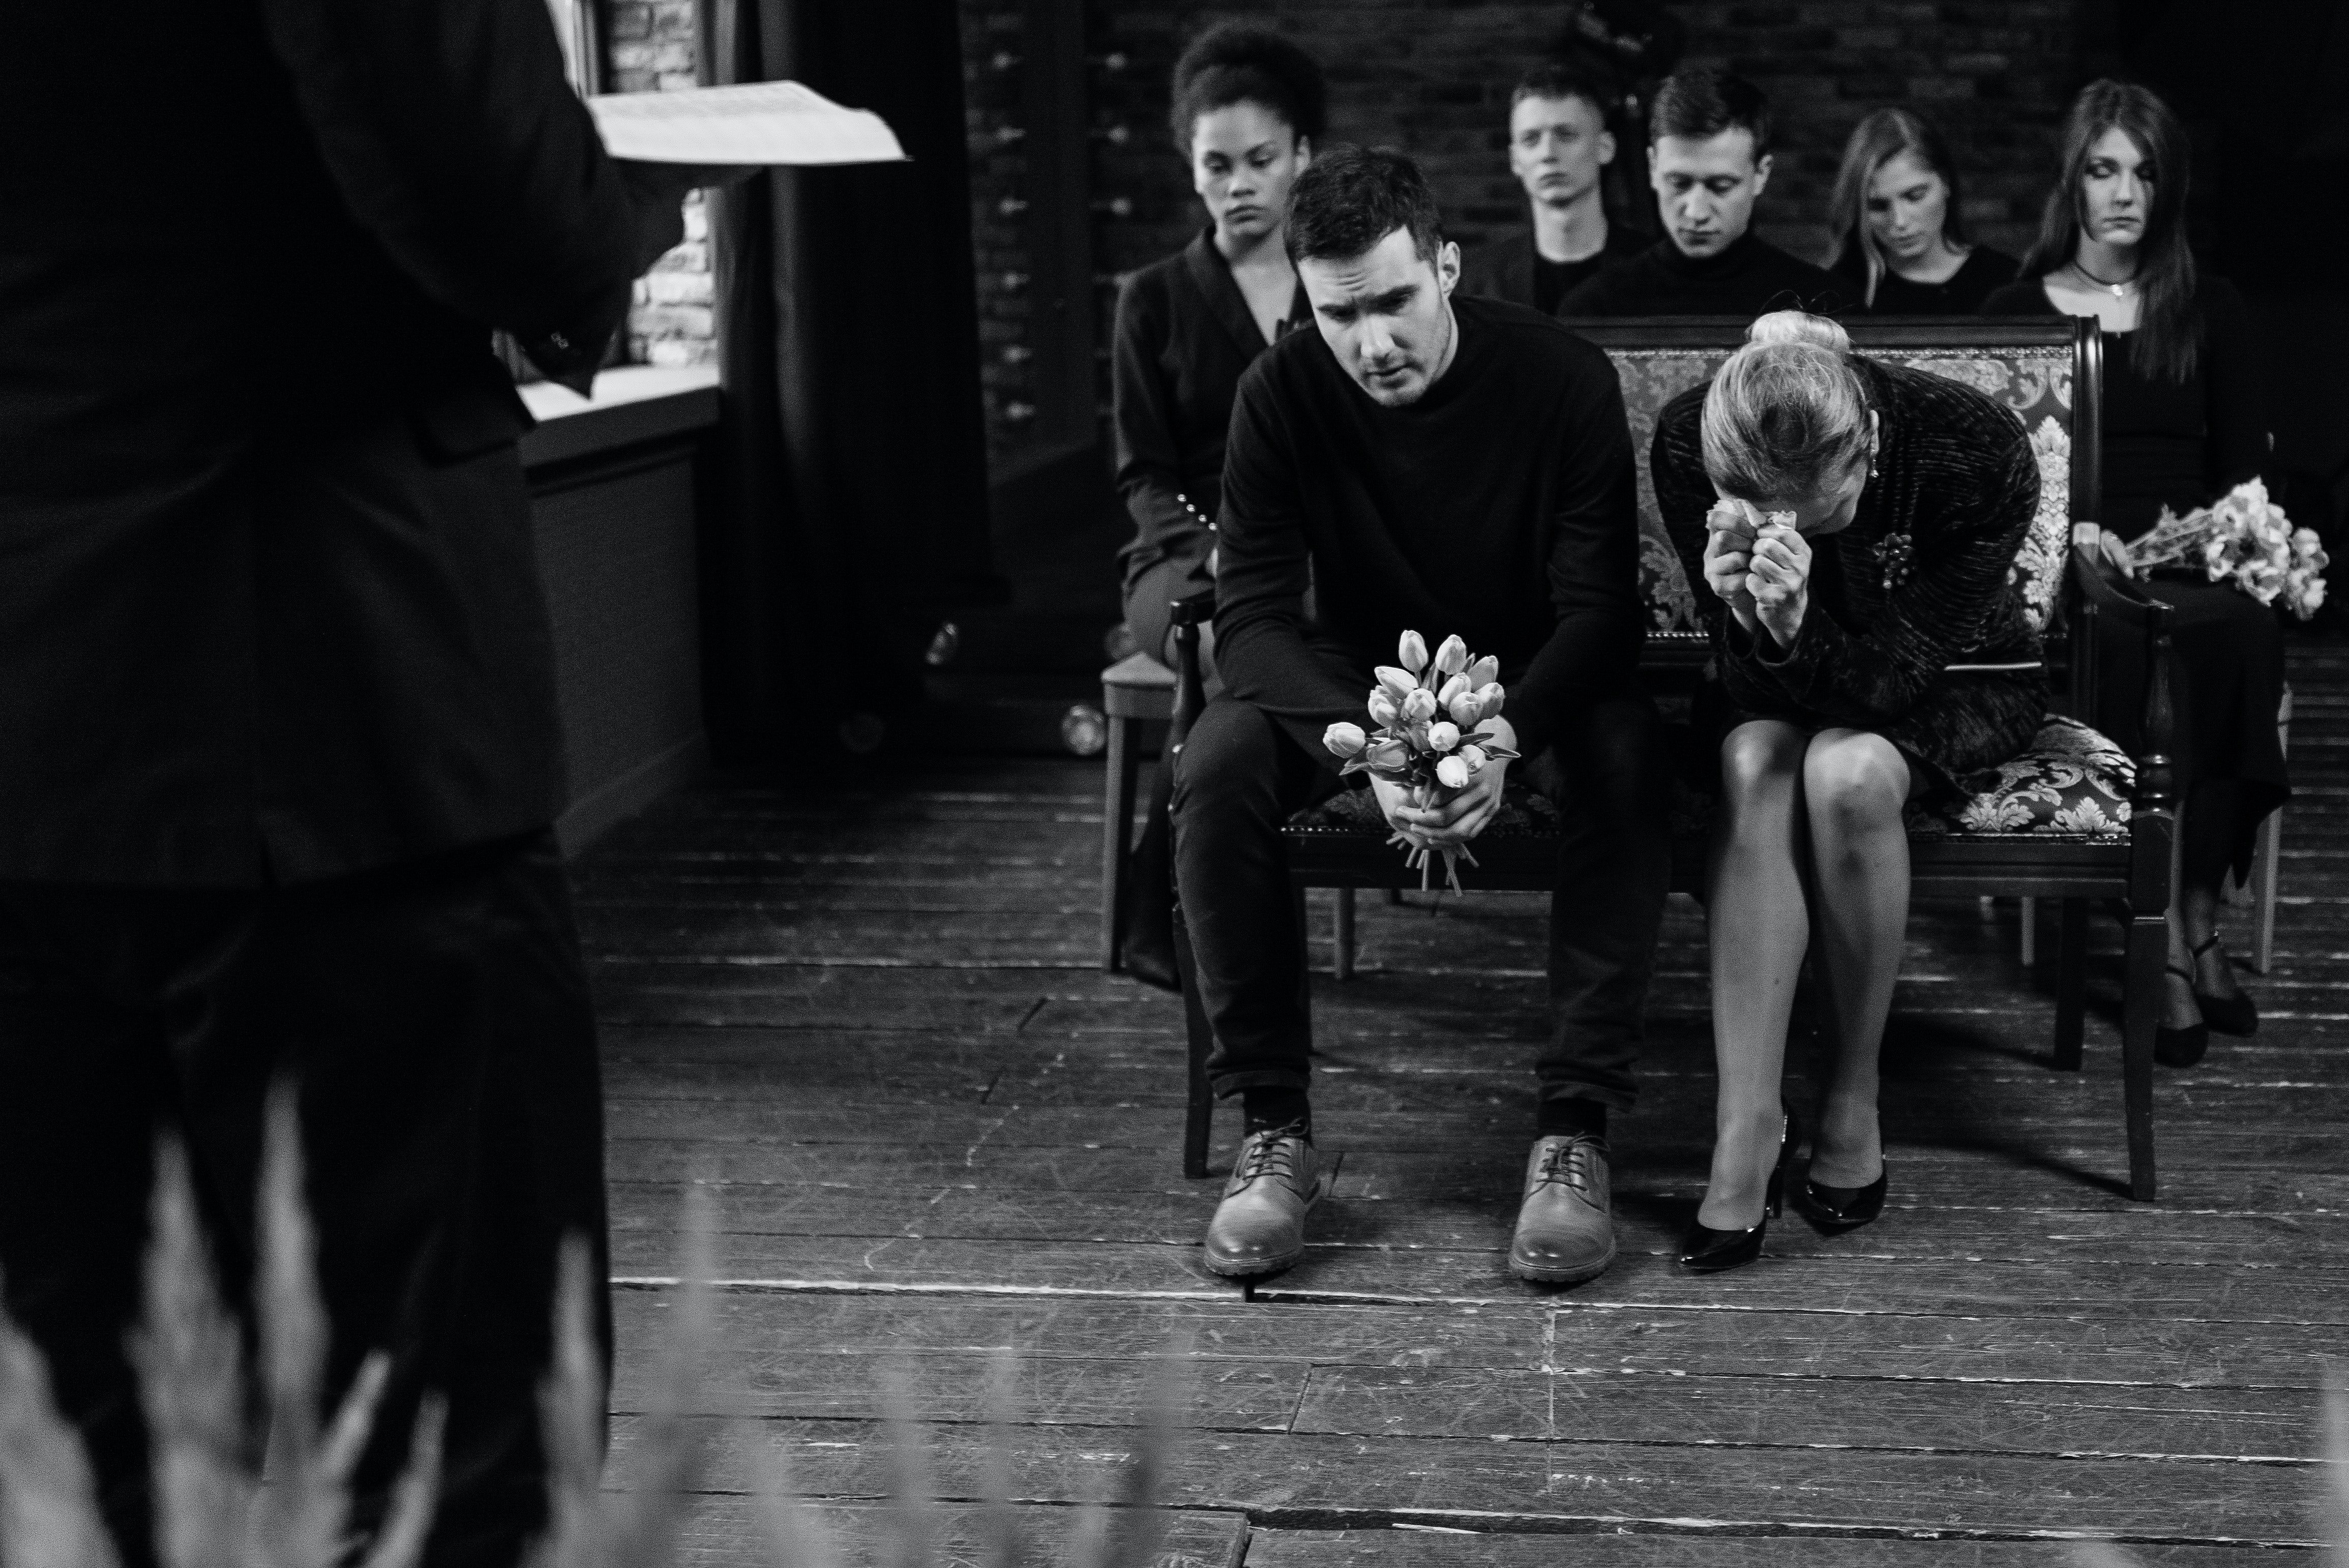 People at a funeral. | Photo: Pexels